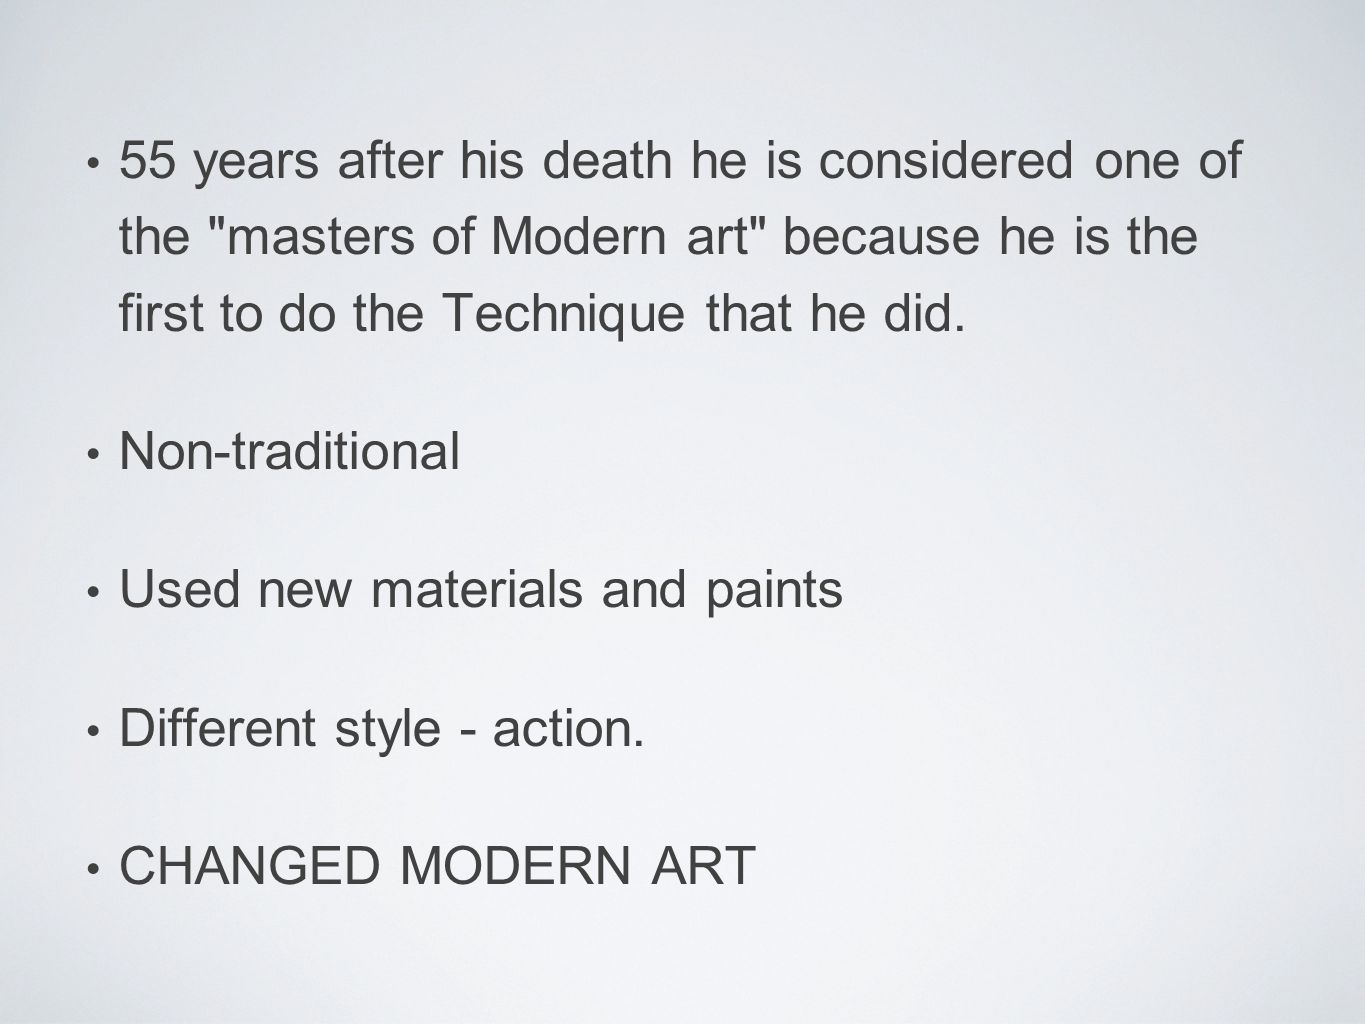 55 years after his death he is considered one of the masters of Modern art because he is the first to do the Technique that he did.